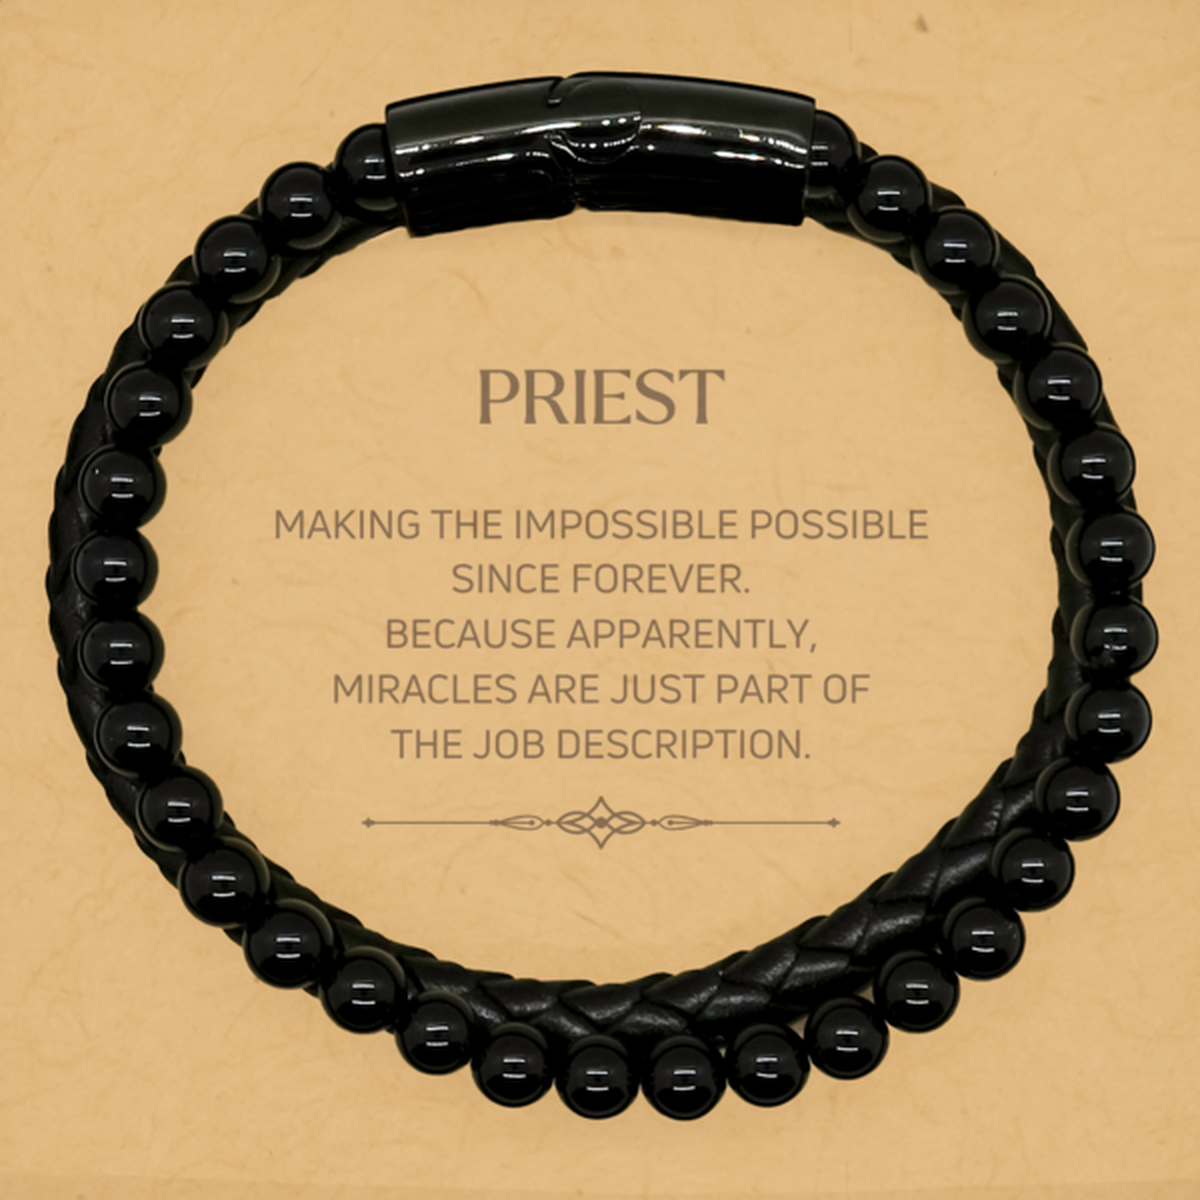 Funny Priest Gifts, Miracles are just part of the job description, Inspirational Birthday Stone Leather Bracelets For Priest, Men, Women, Coworkers, Friends, Boss